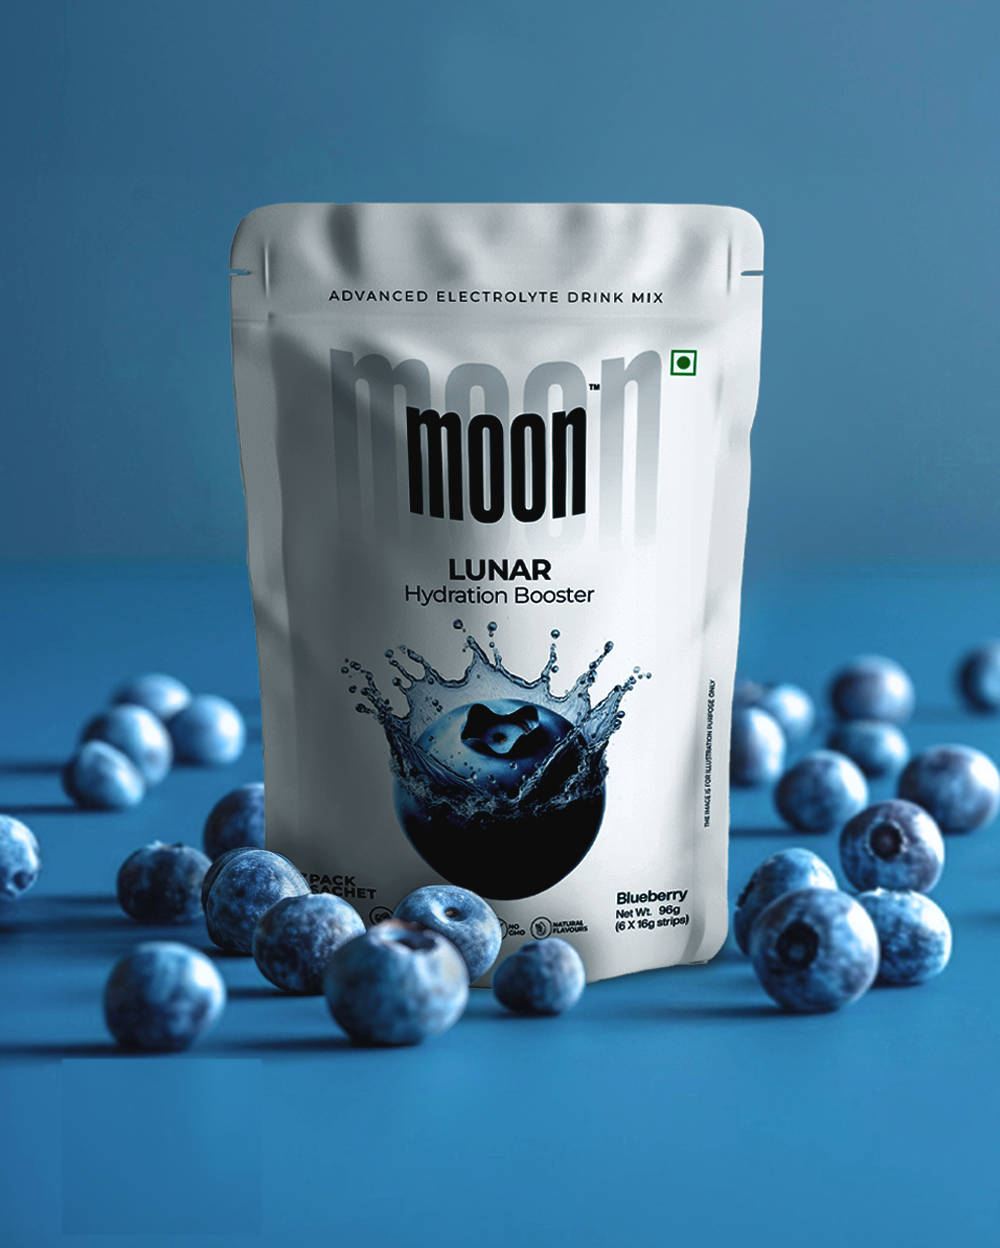 A pouch of Moon Lunar Green Apple + Blueberry Hydration Booster by MOONFREEZE FOODS PRIVATE LIMITED, with a blueberry flavor, surrounded by blueberries on a matching blue backdrop.